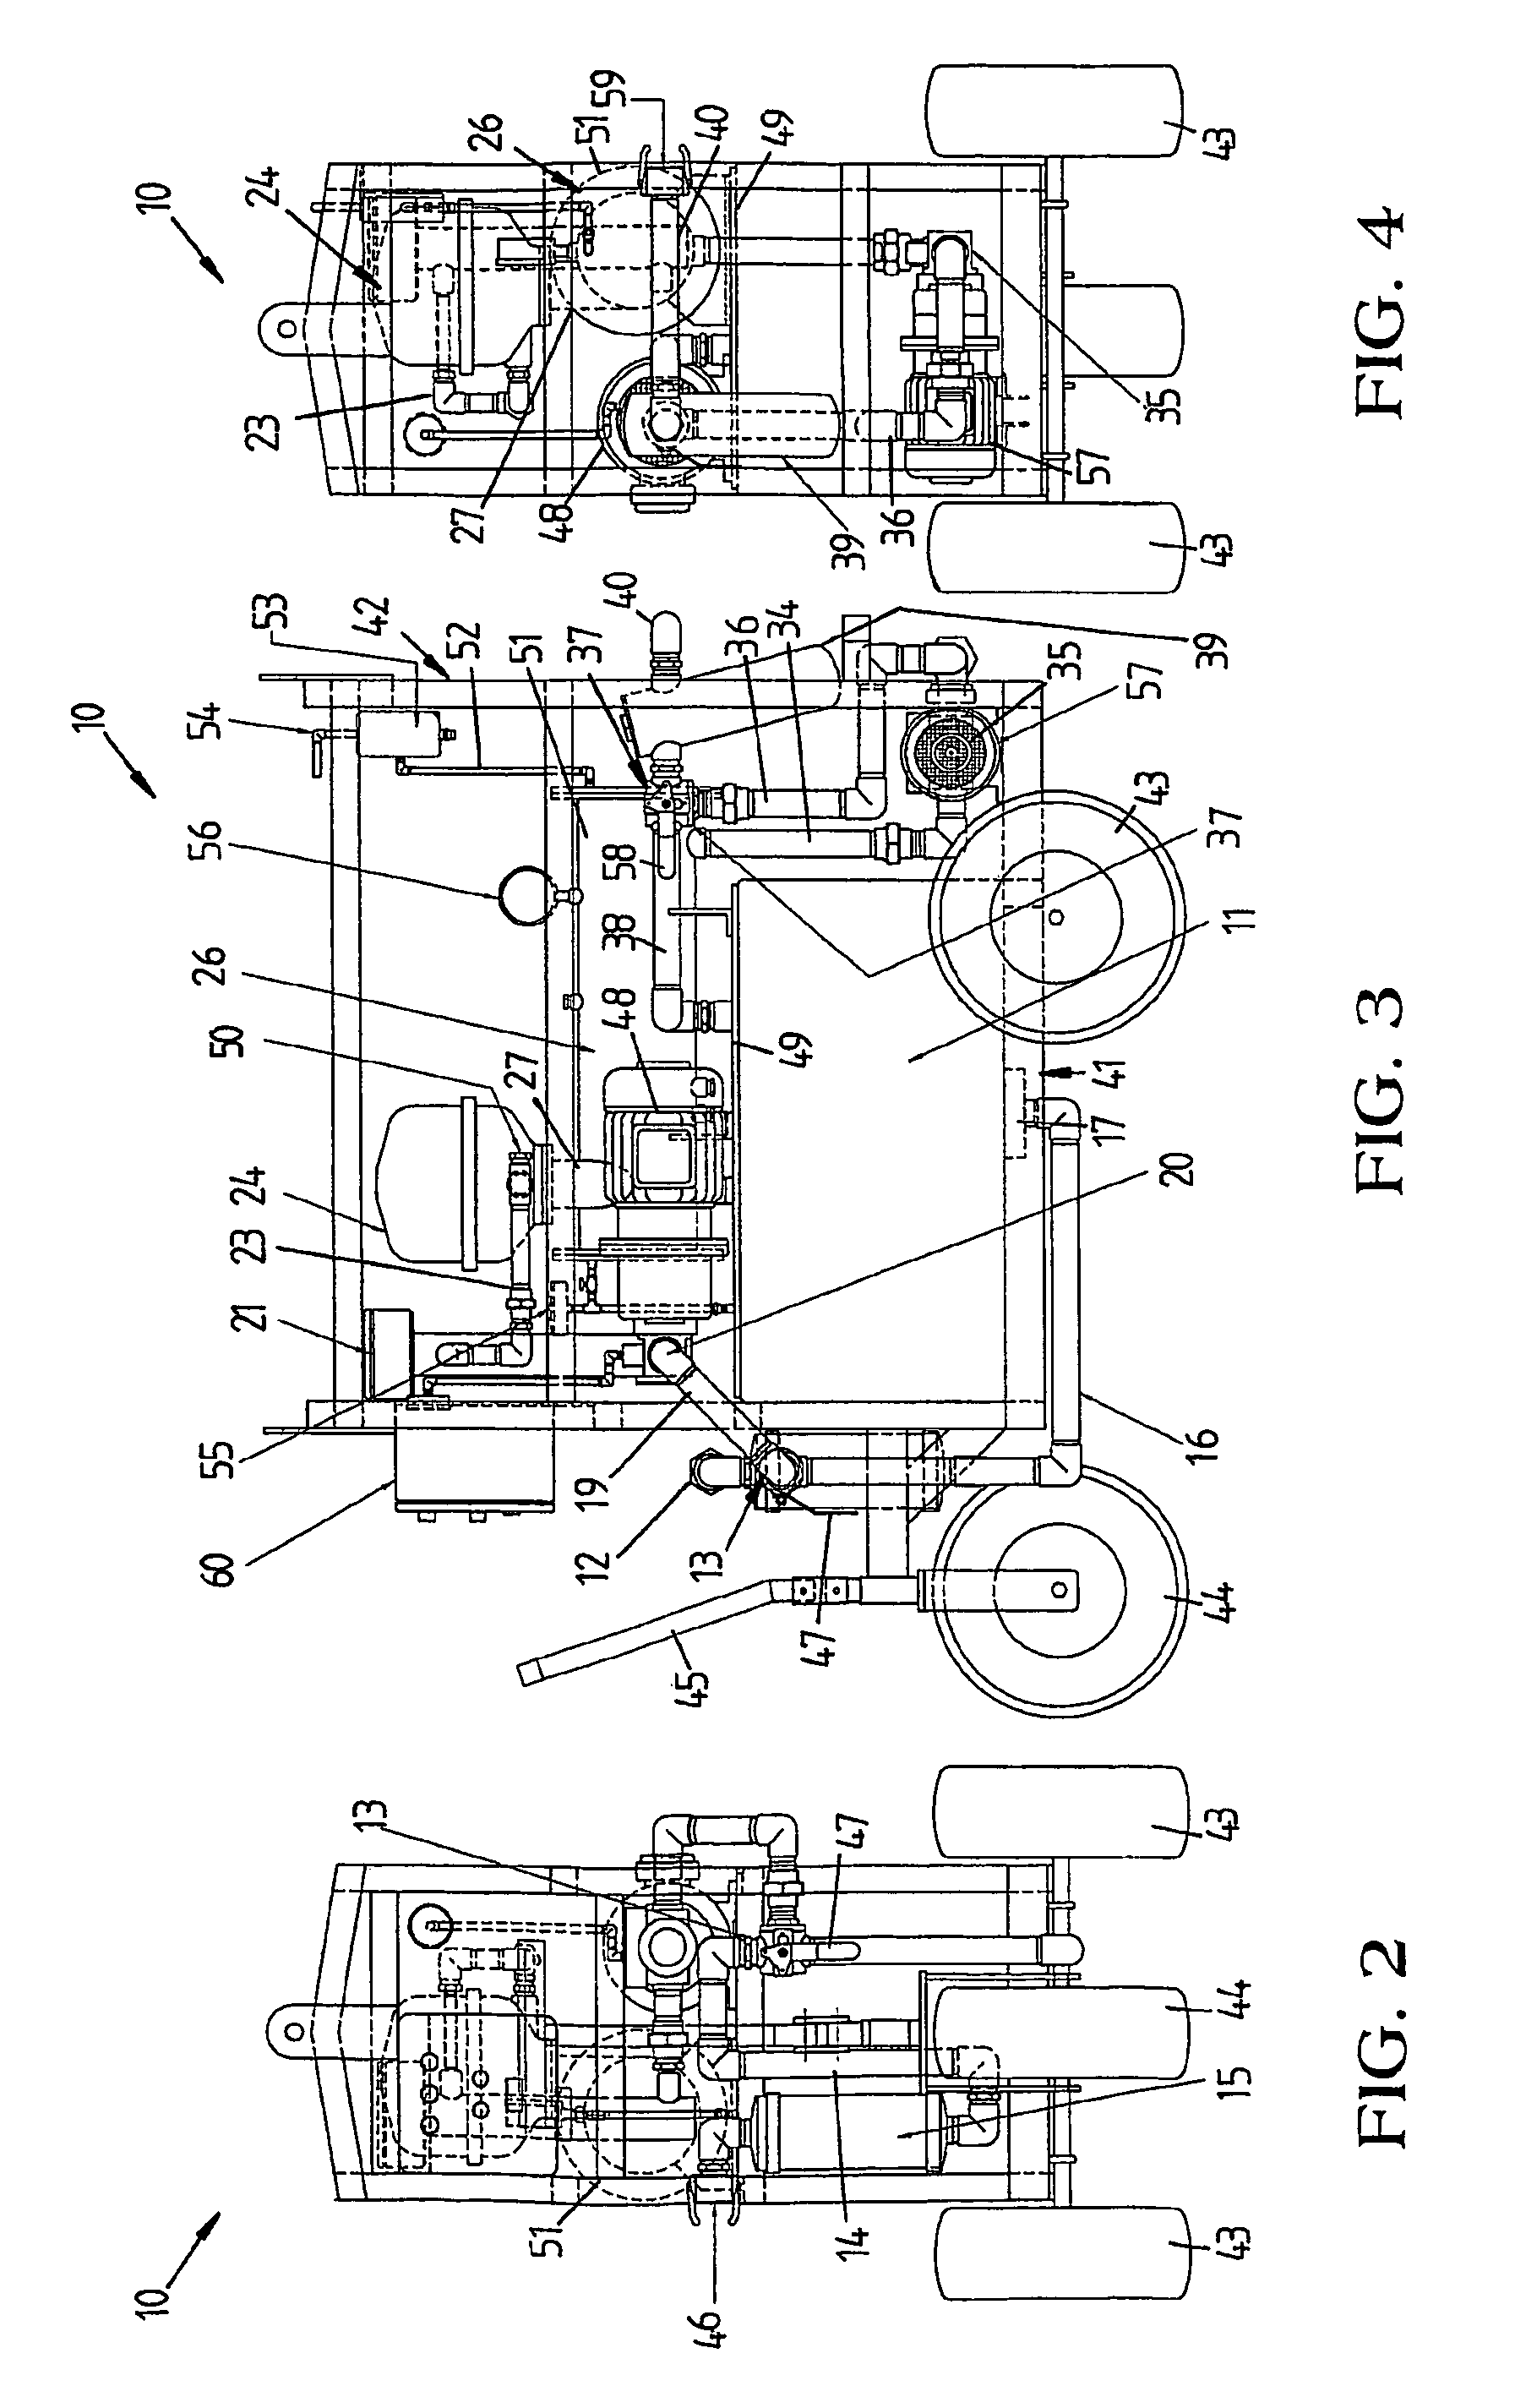 Apparatus for cleaning contaminated oil